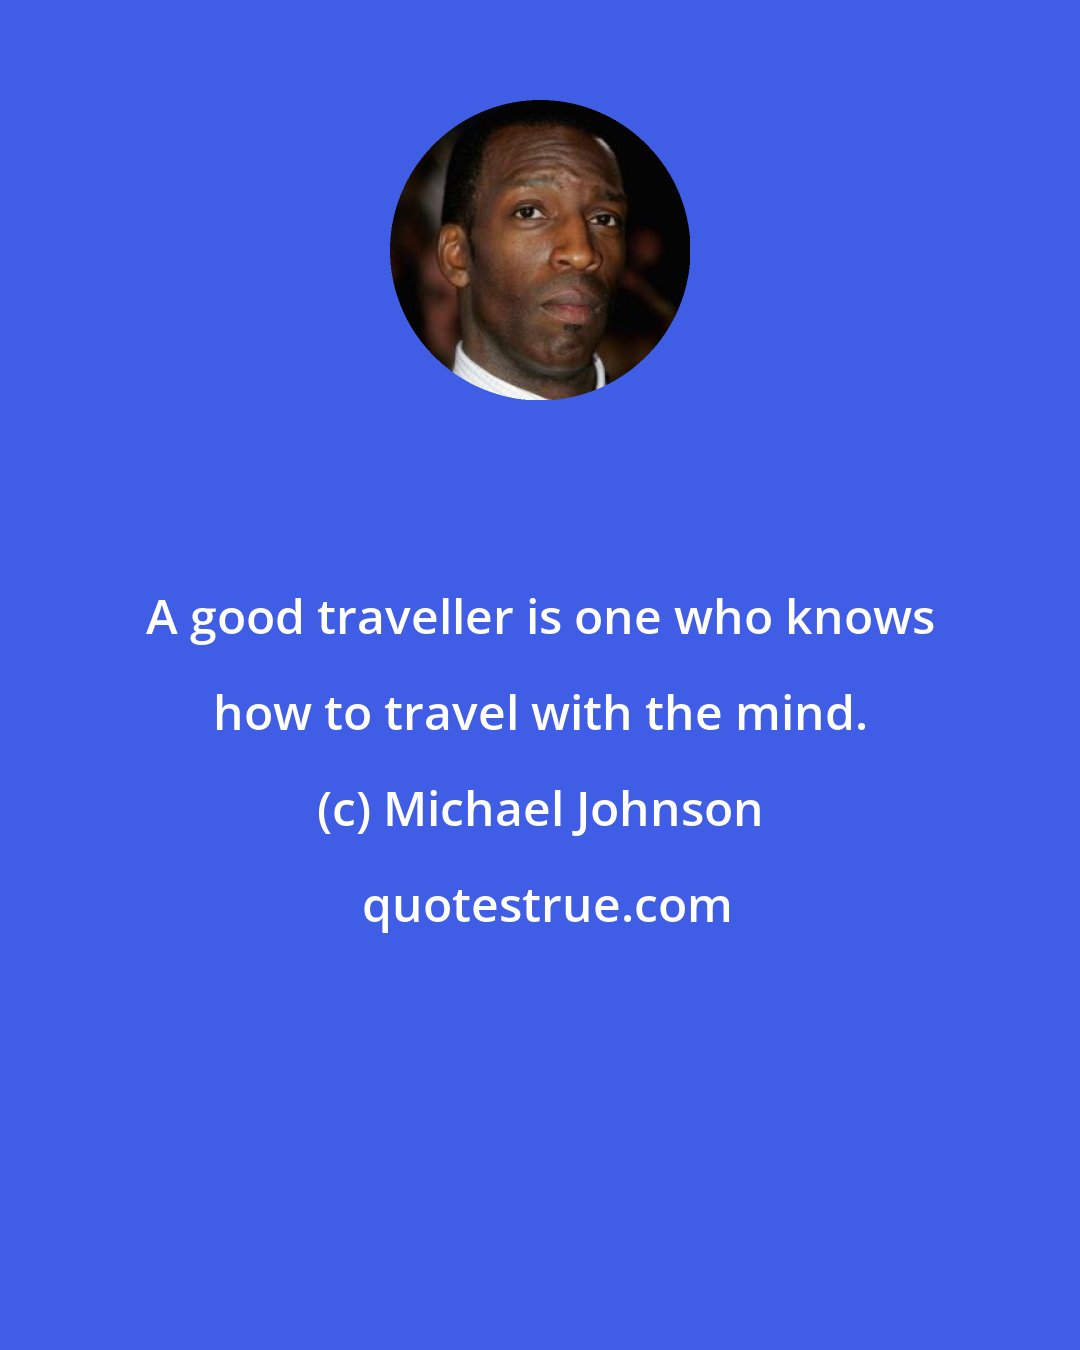 Michael Johnson: A good traveller is one who knows how to travel with the mind.